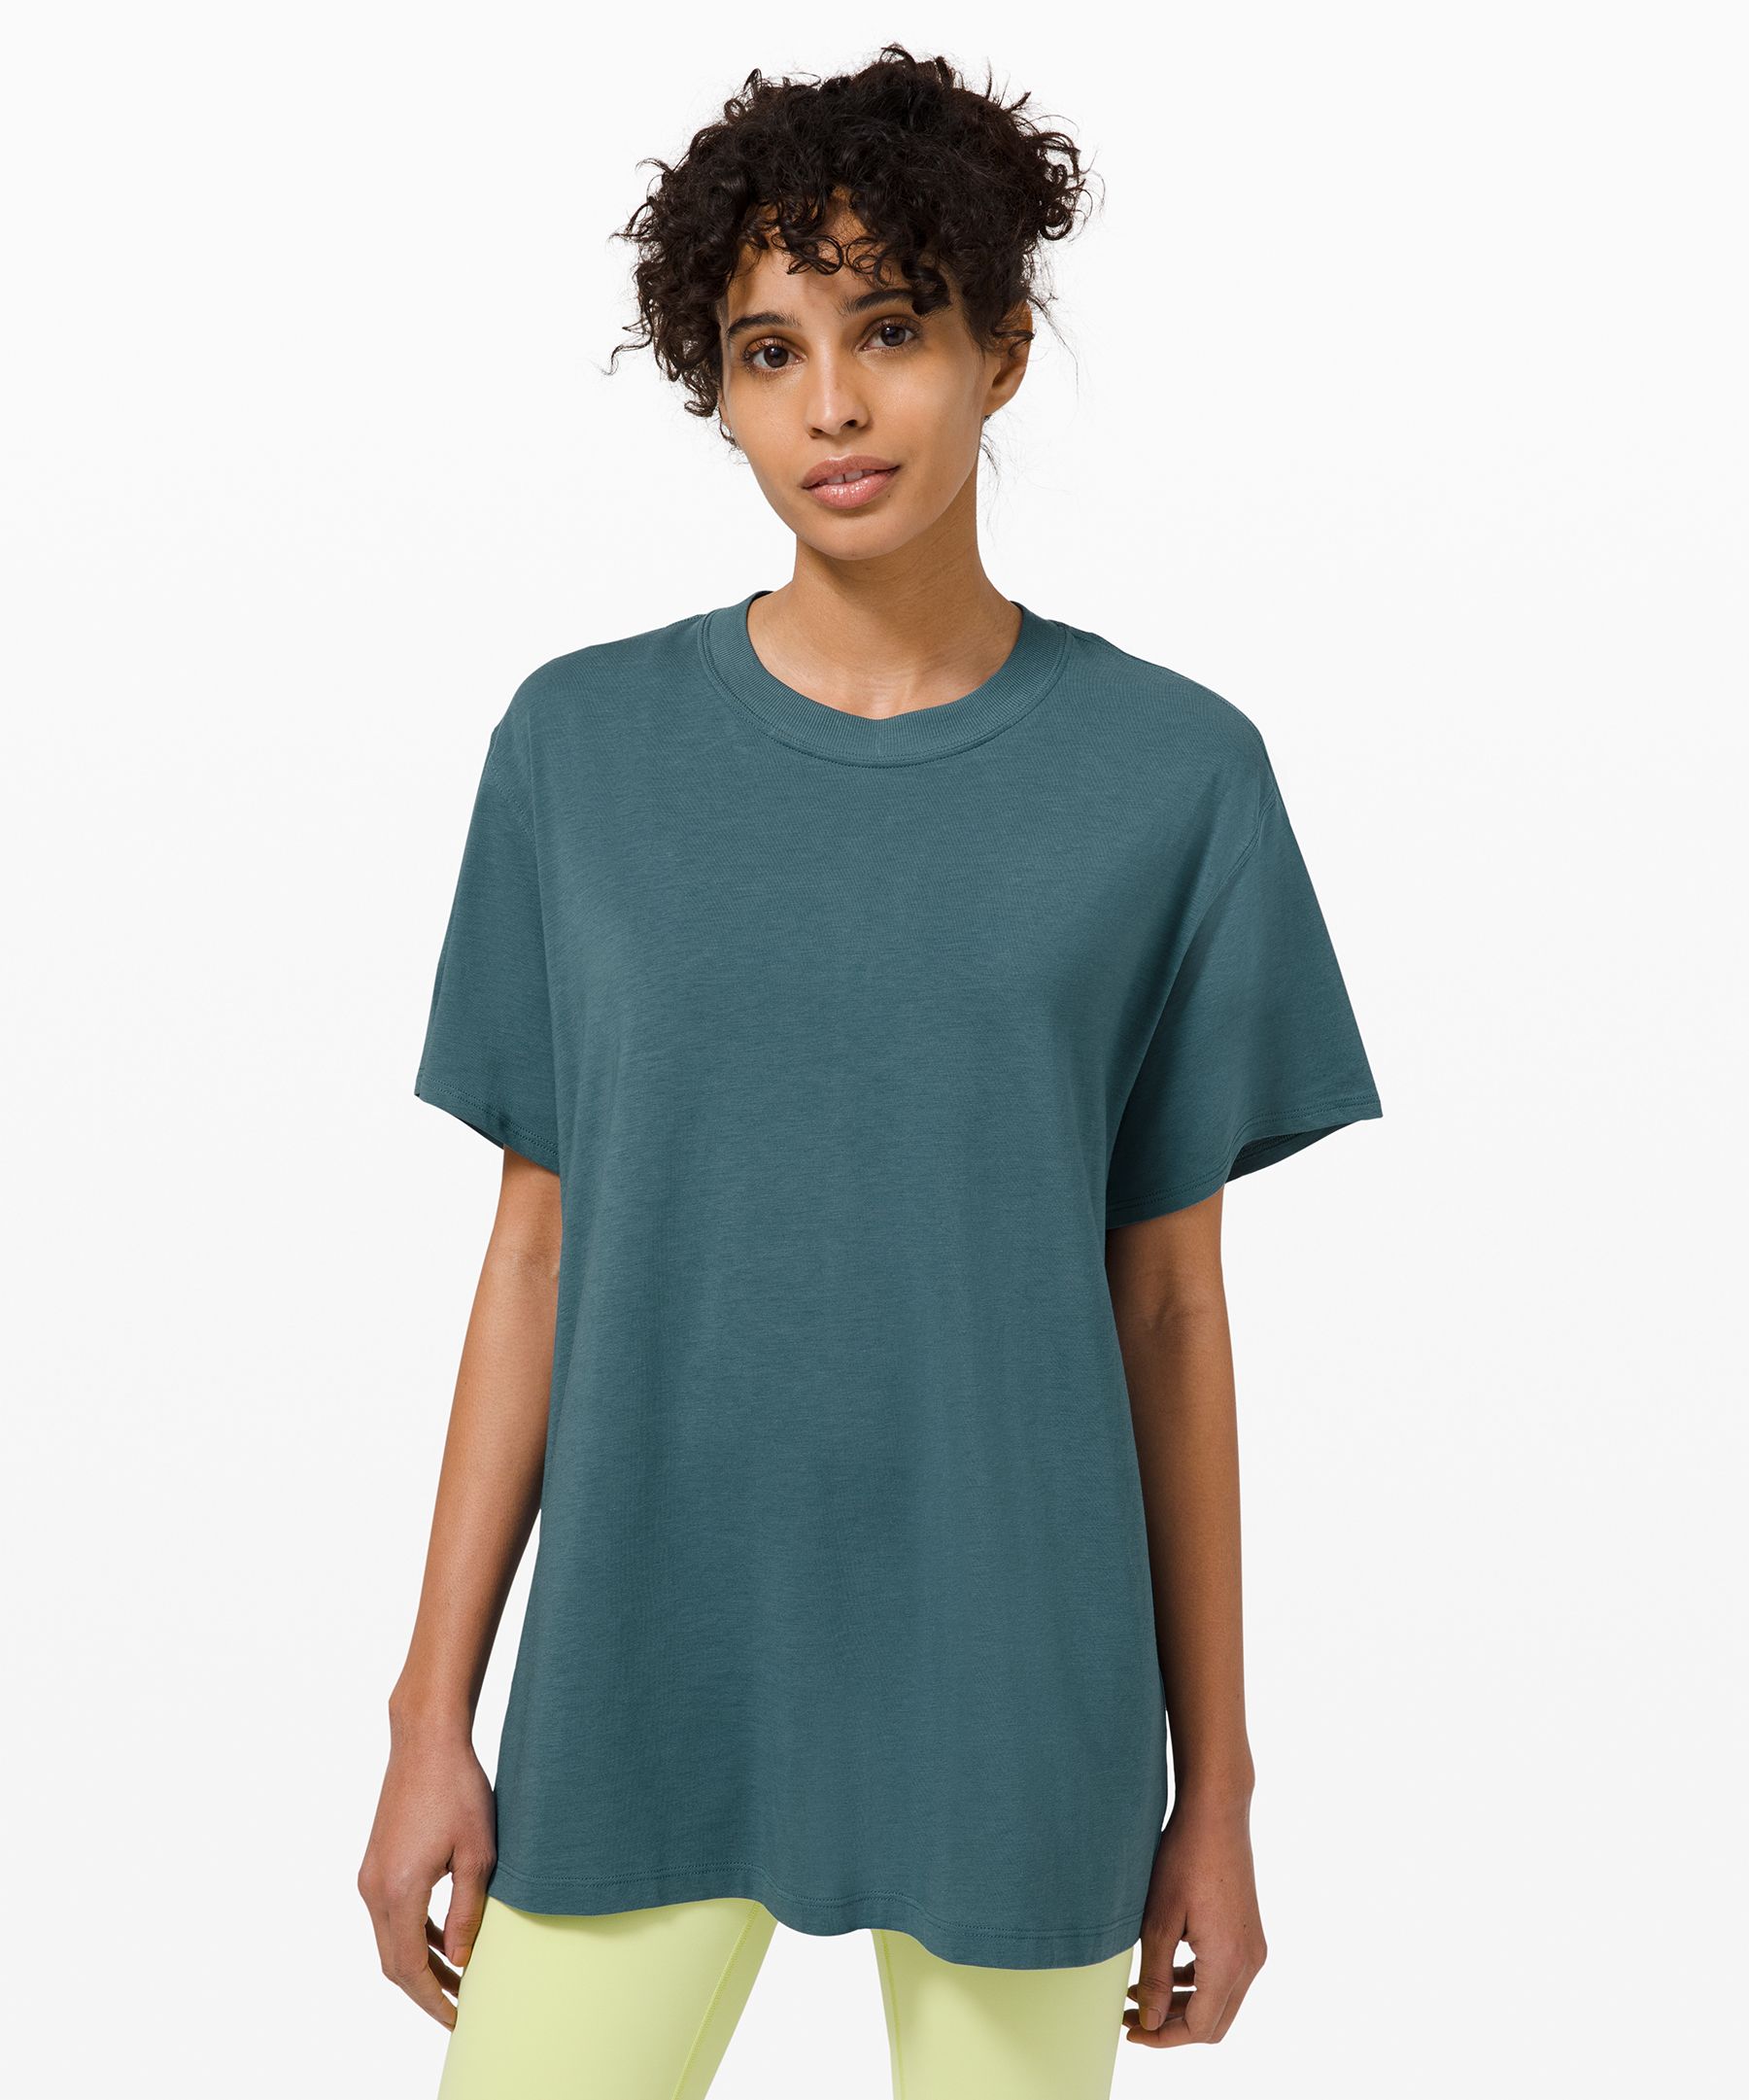 All Yours Tee | Women's T-Shirts | lululemon